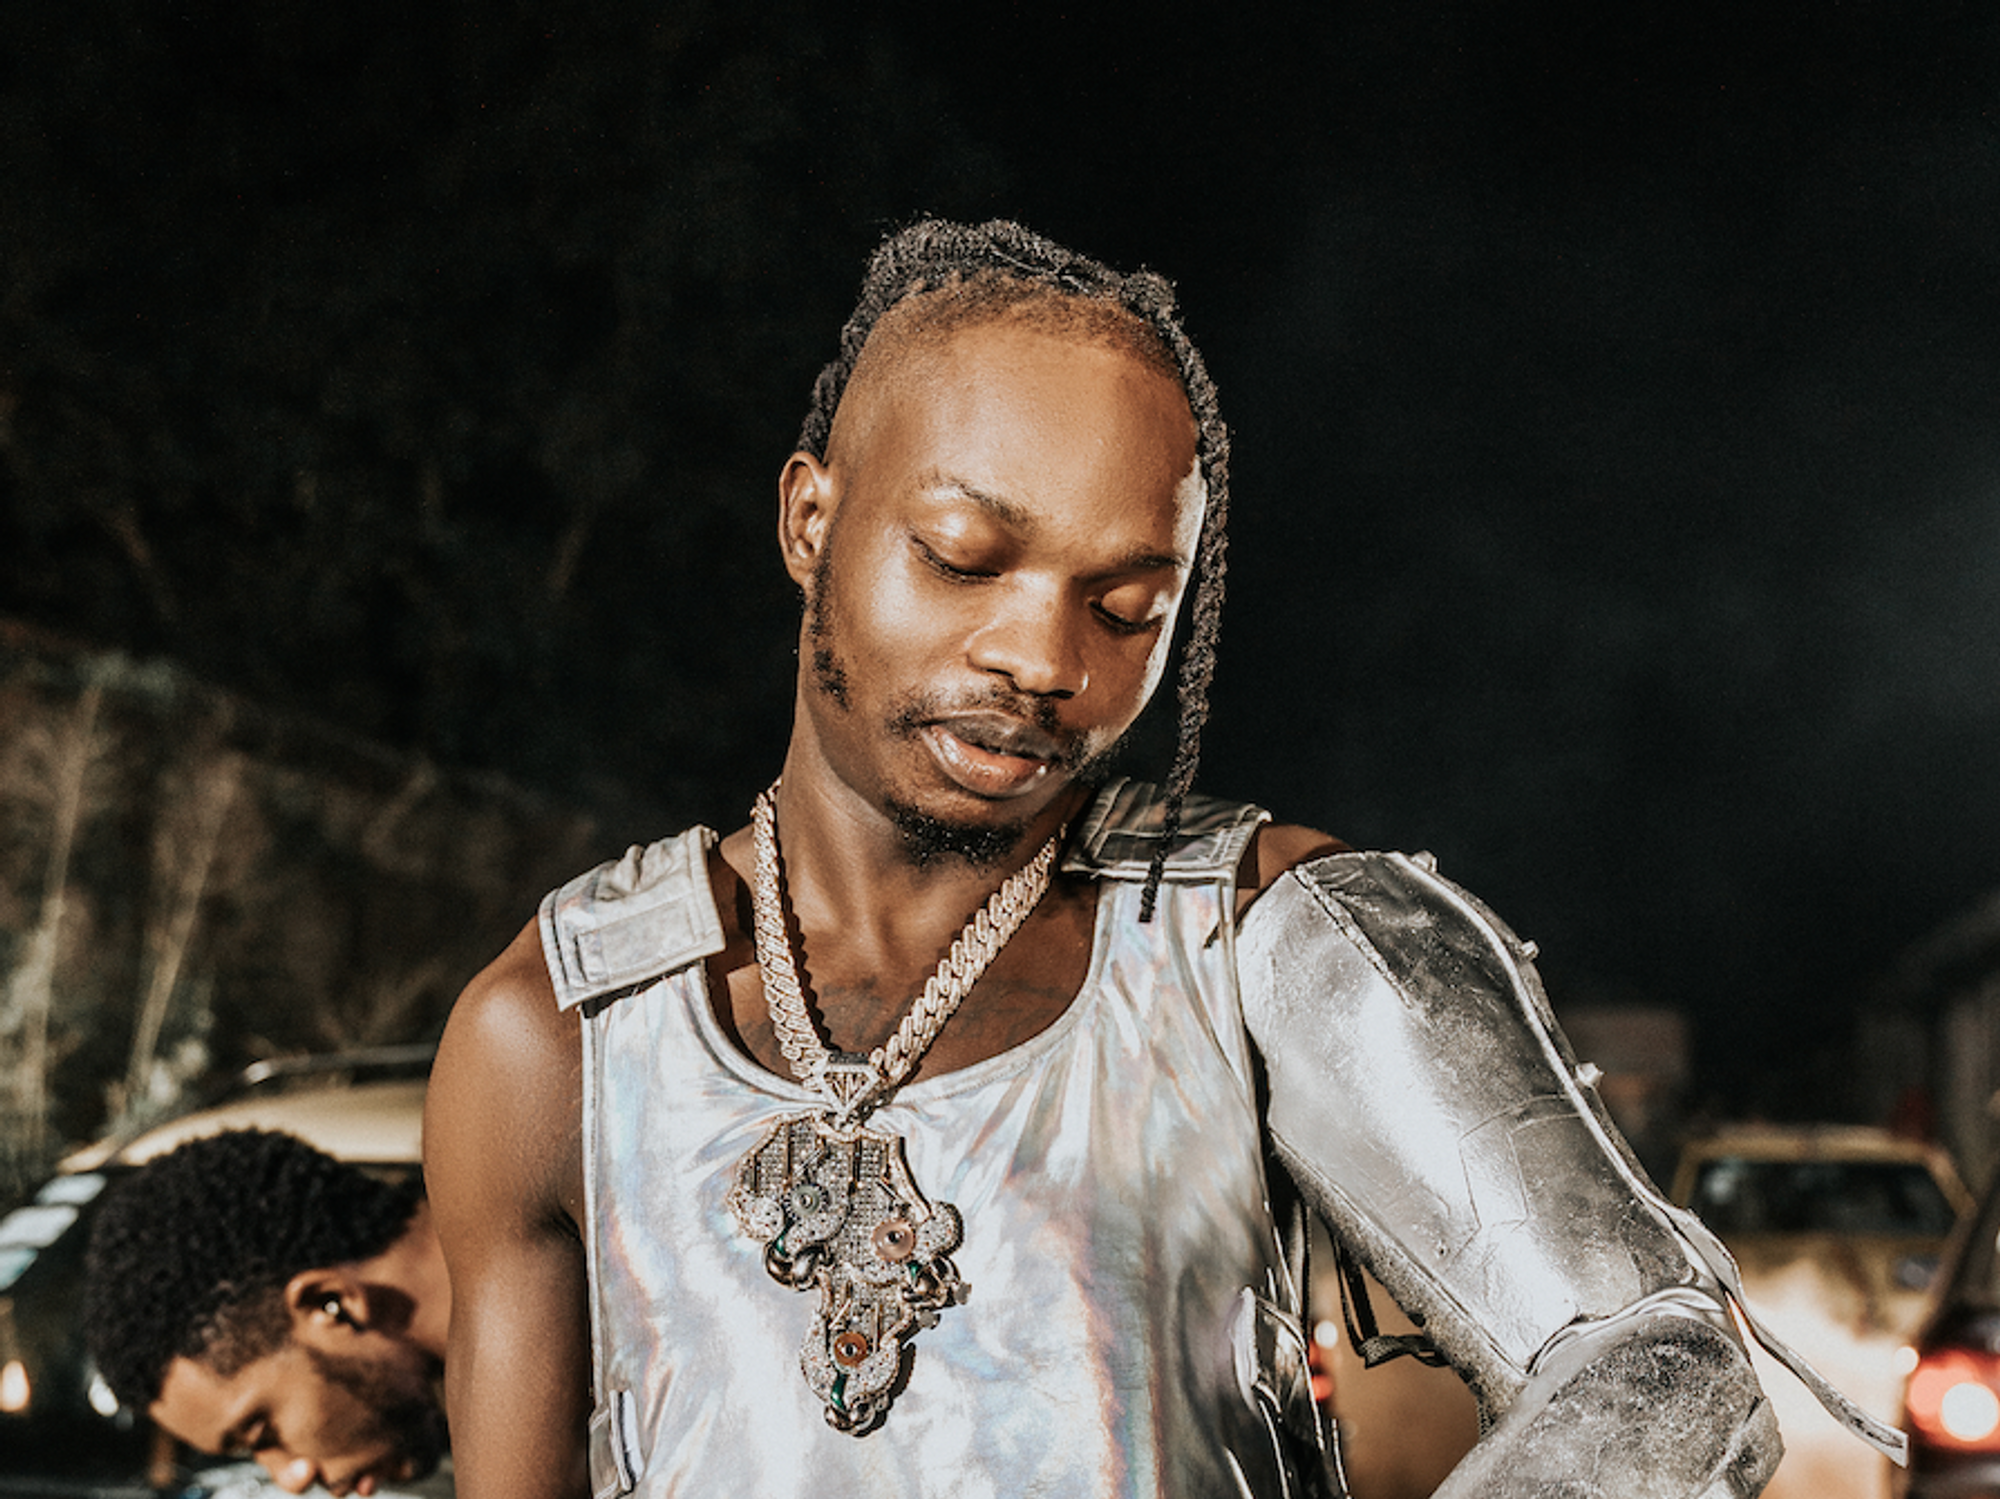 Pictured: Nigerian rapper Naira Marley in a BTS shot from his latest music video for single "Kojosese"